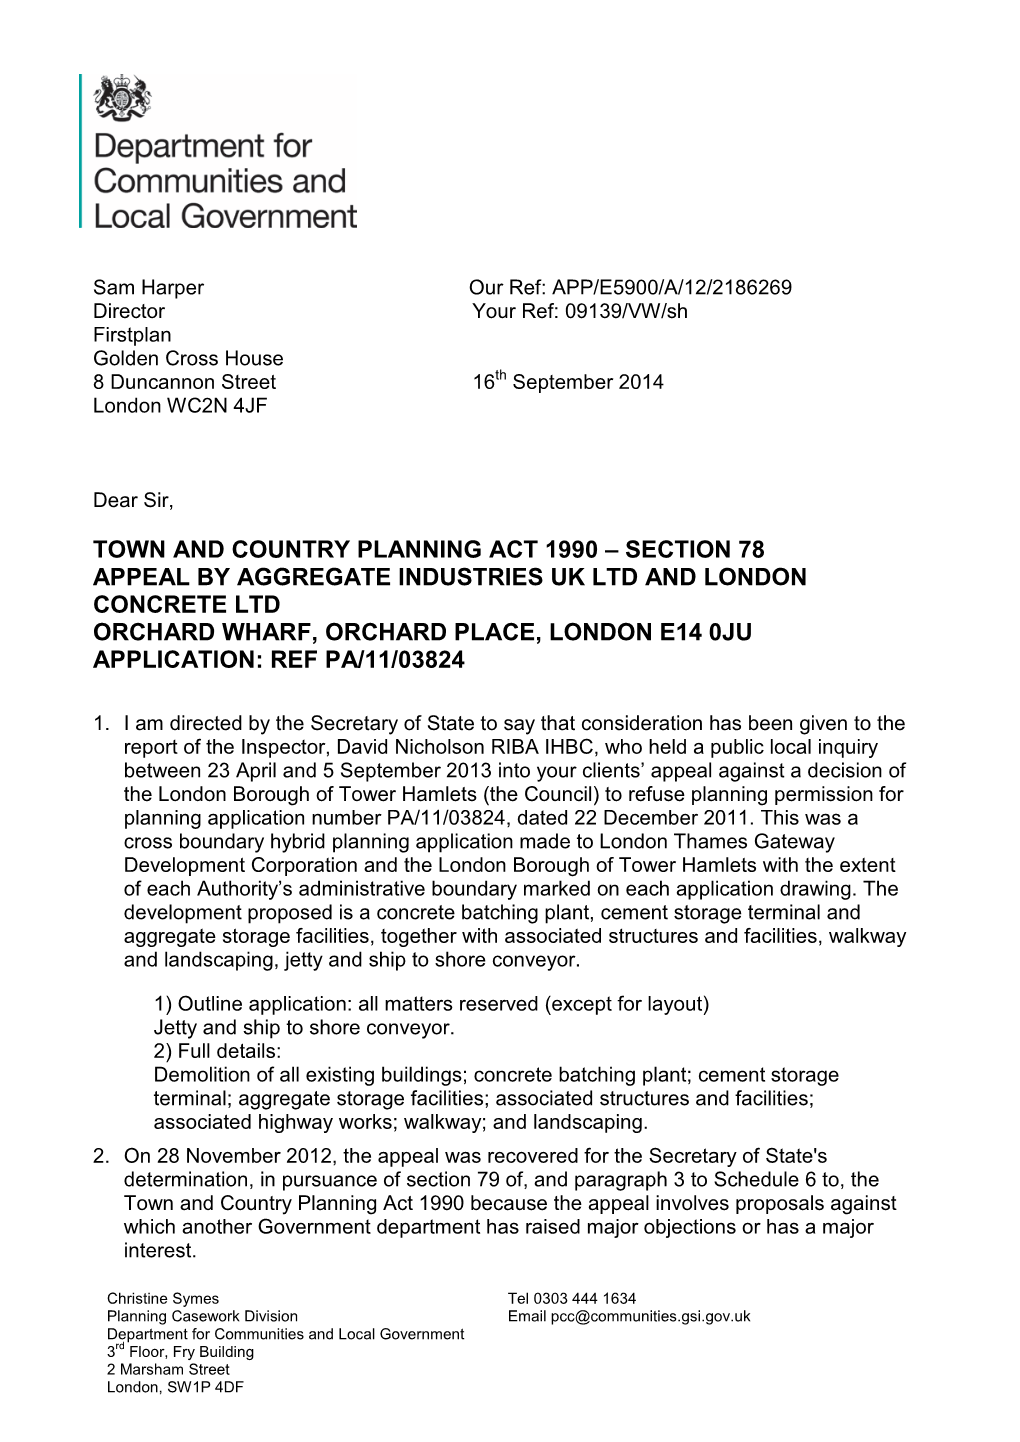 Town and Country Planning Act 1990 – Section 78 Appeal